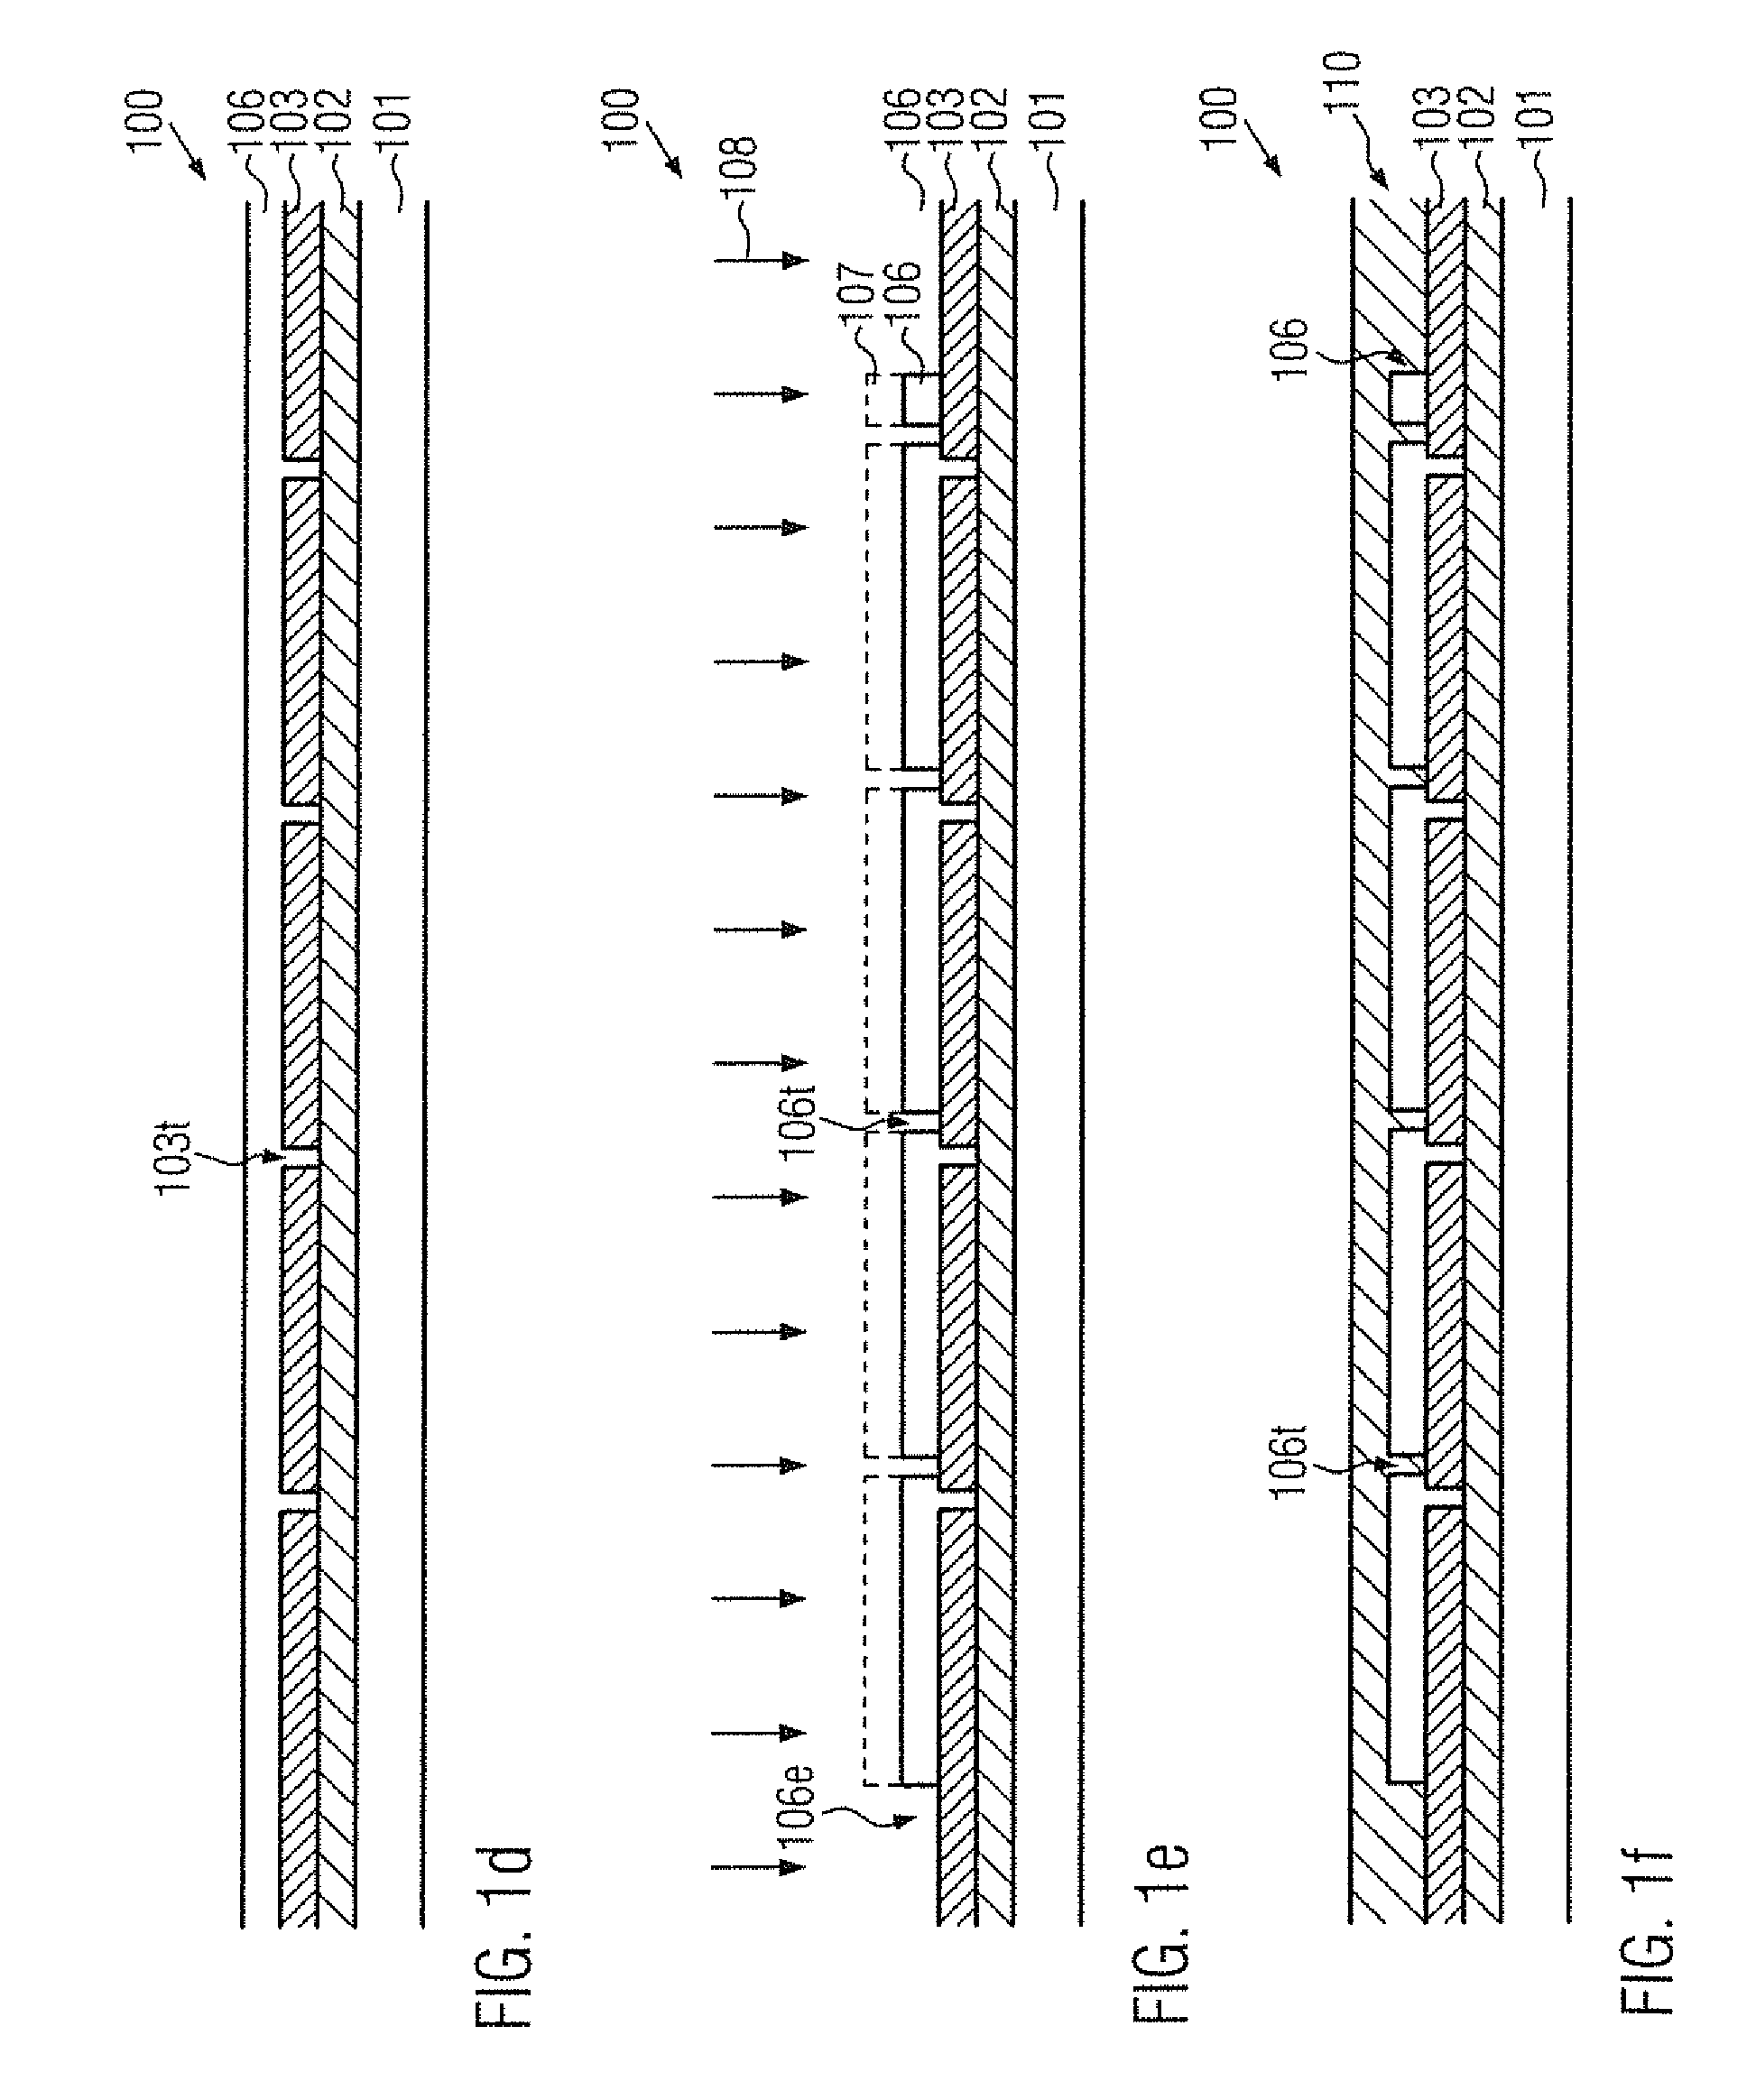 Thin film solar cell module including series-connected cells formed on a flexible substrate by using lithography